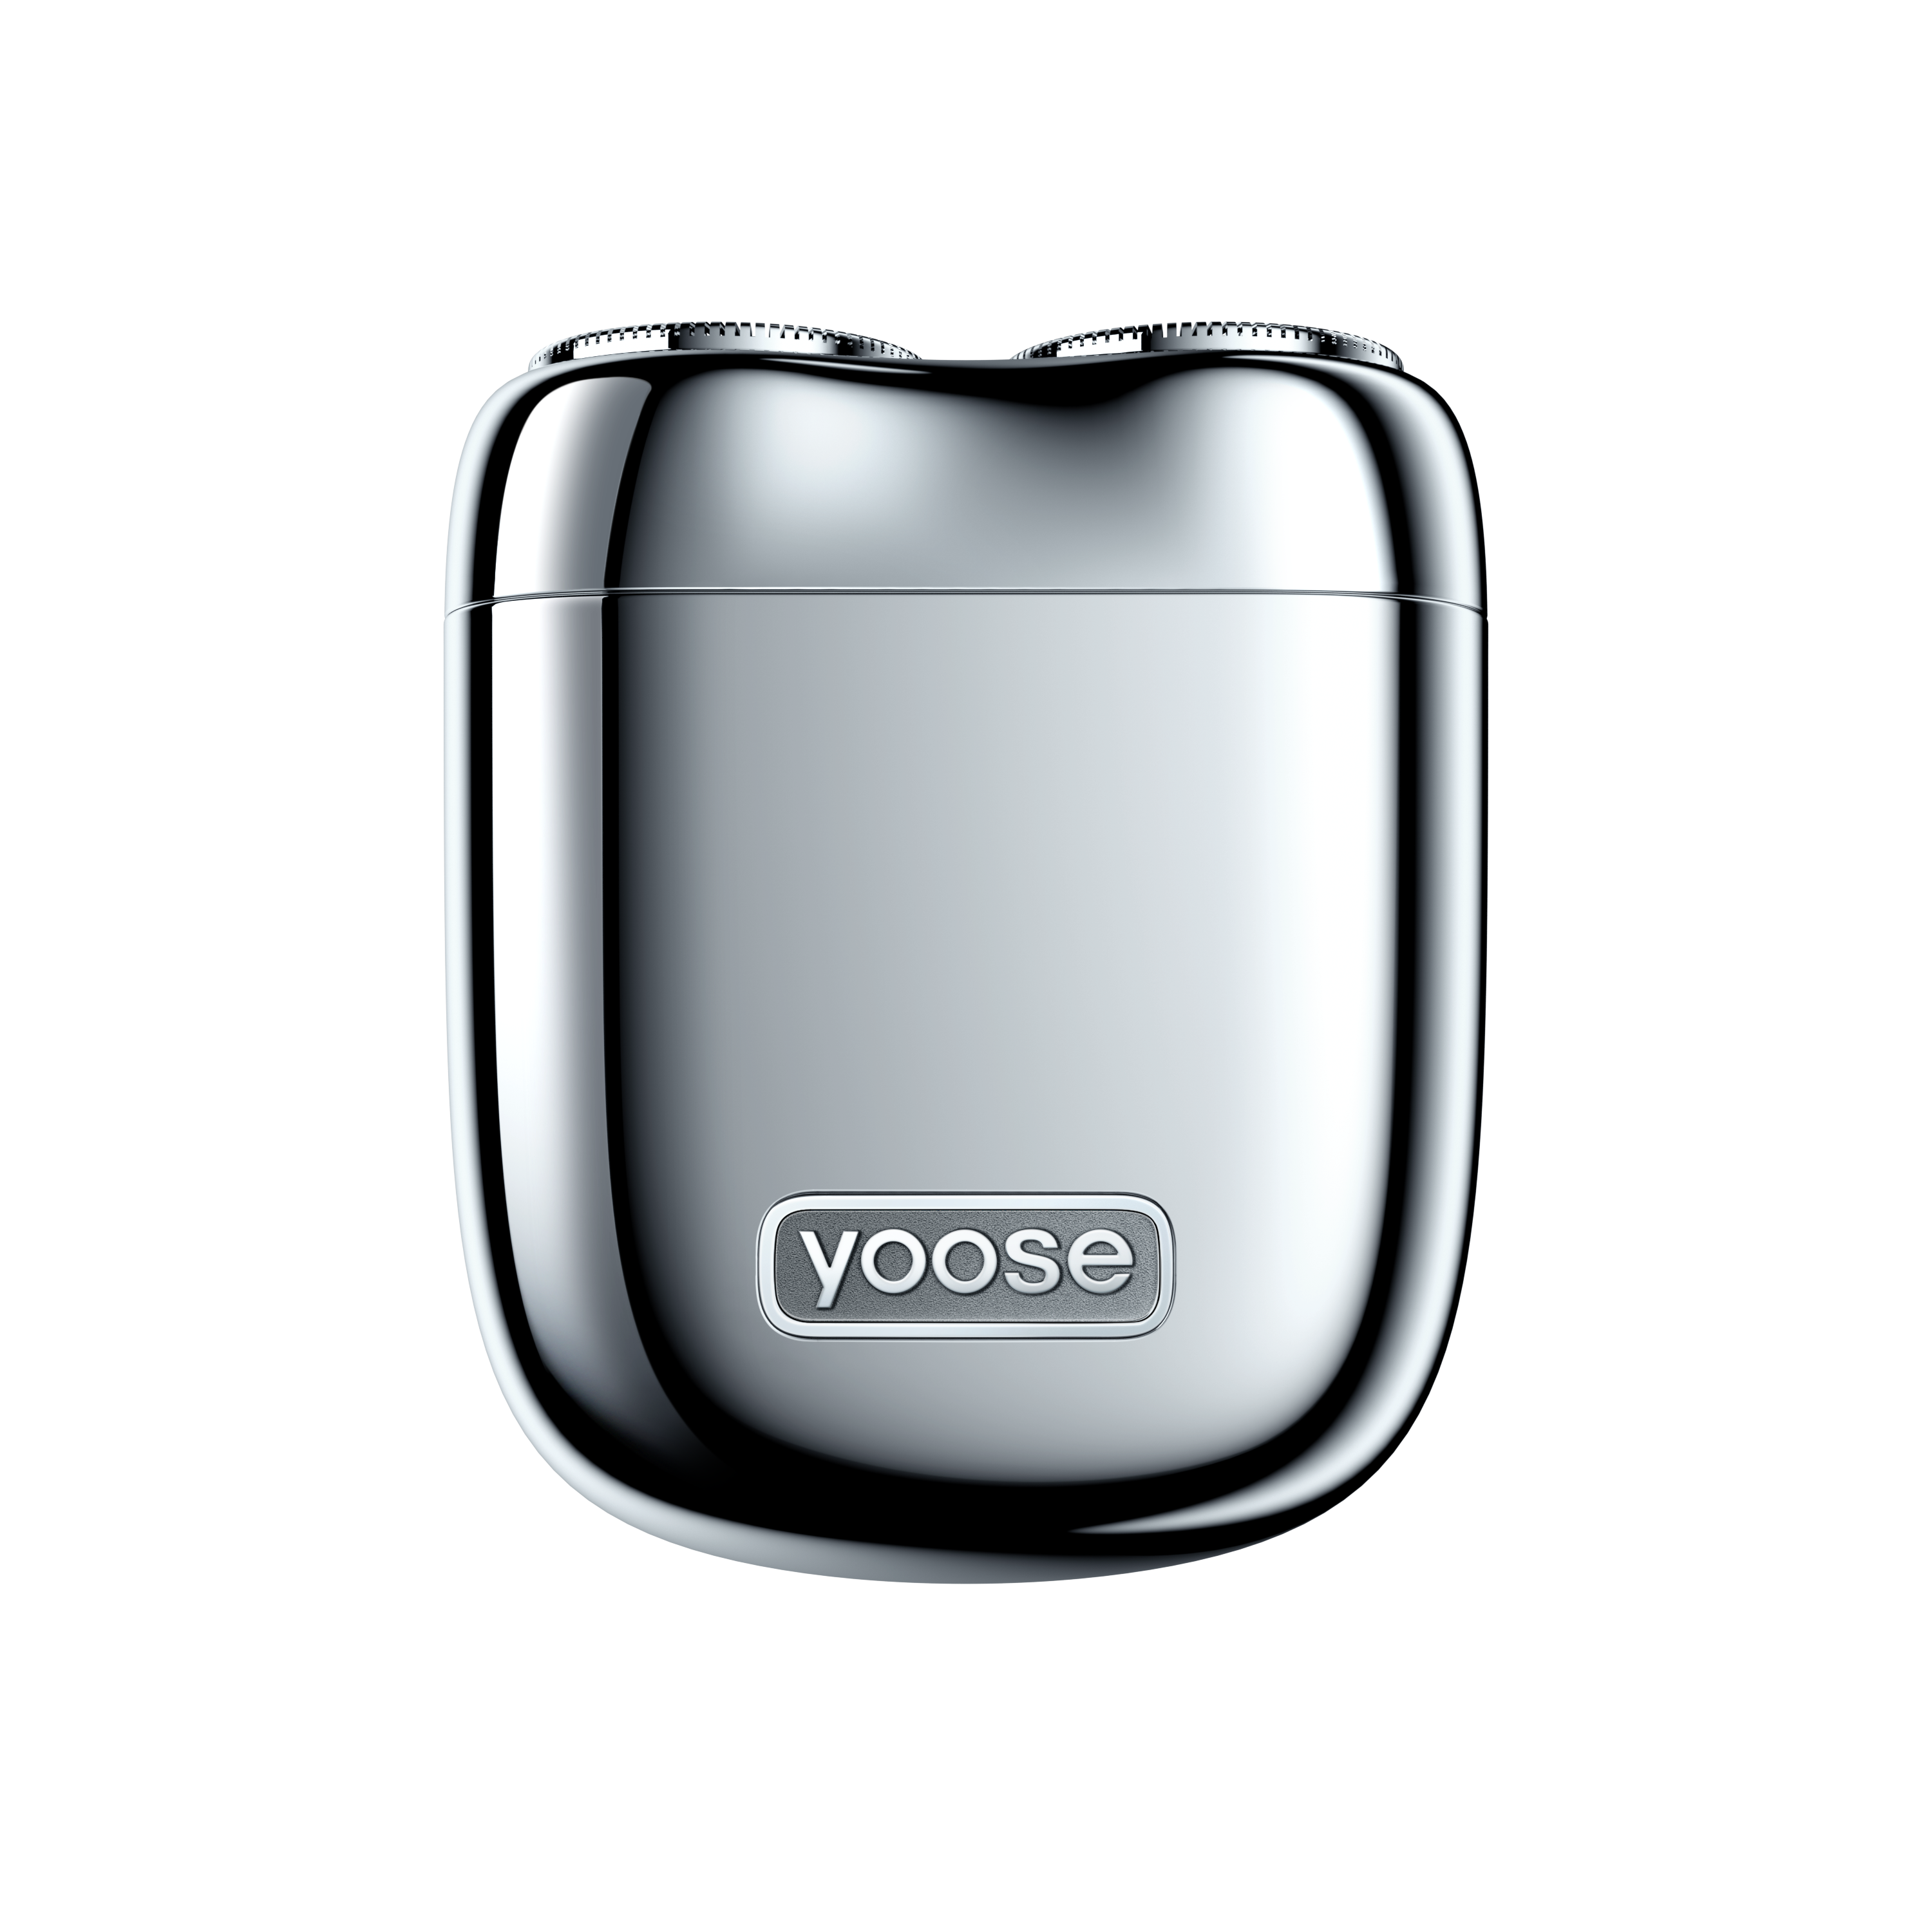 the front side look of yoose mini rotary shaver and demonstrating a silver color of yoose mini shaver